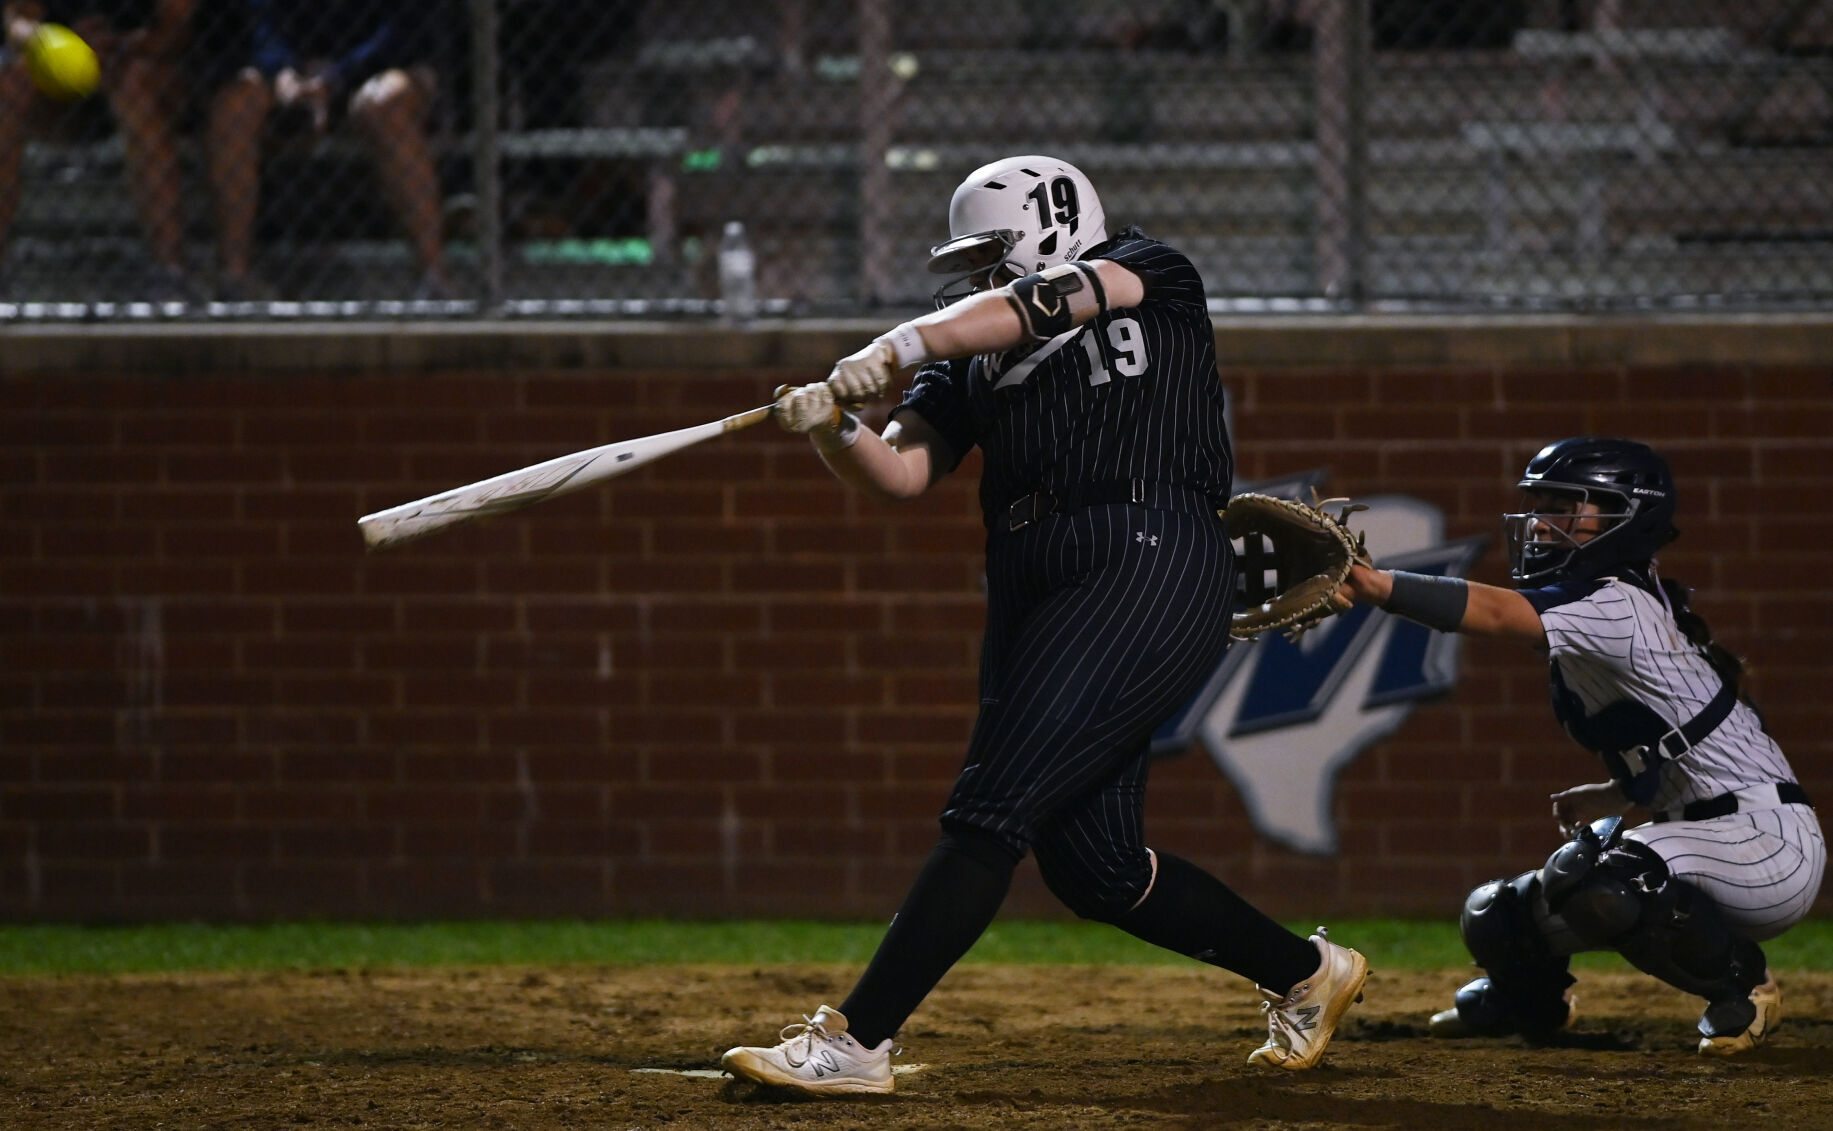 Offensive onslaught leads No. 3 Guyer softball team to Game 1 win over Flower Mound